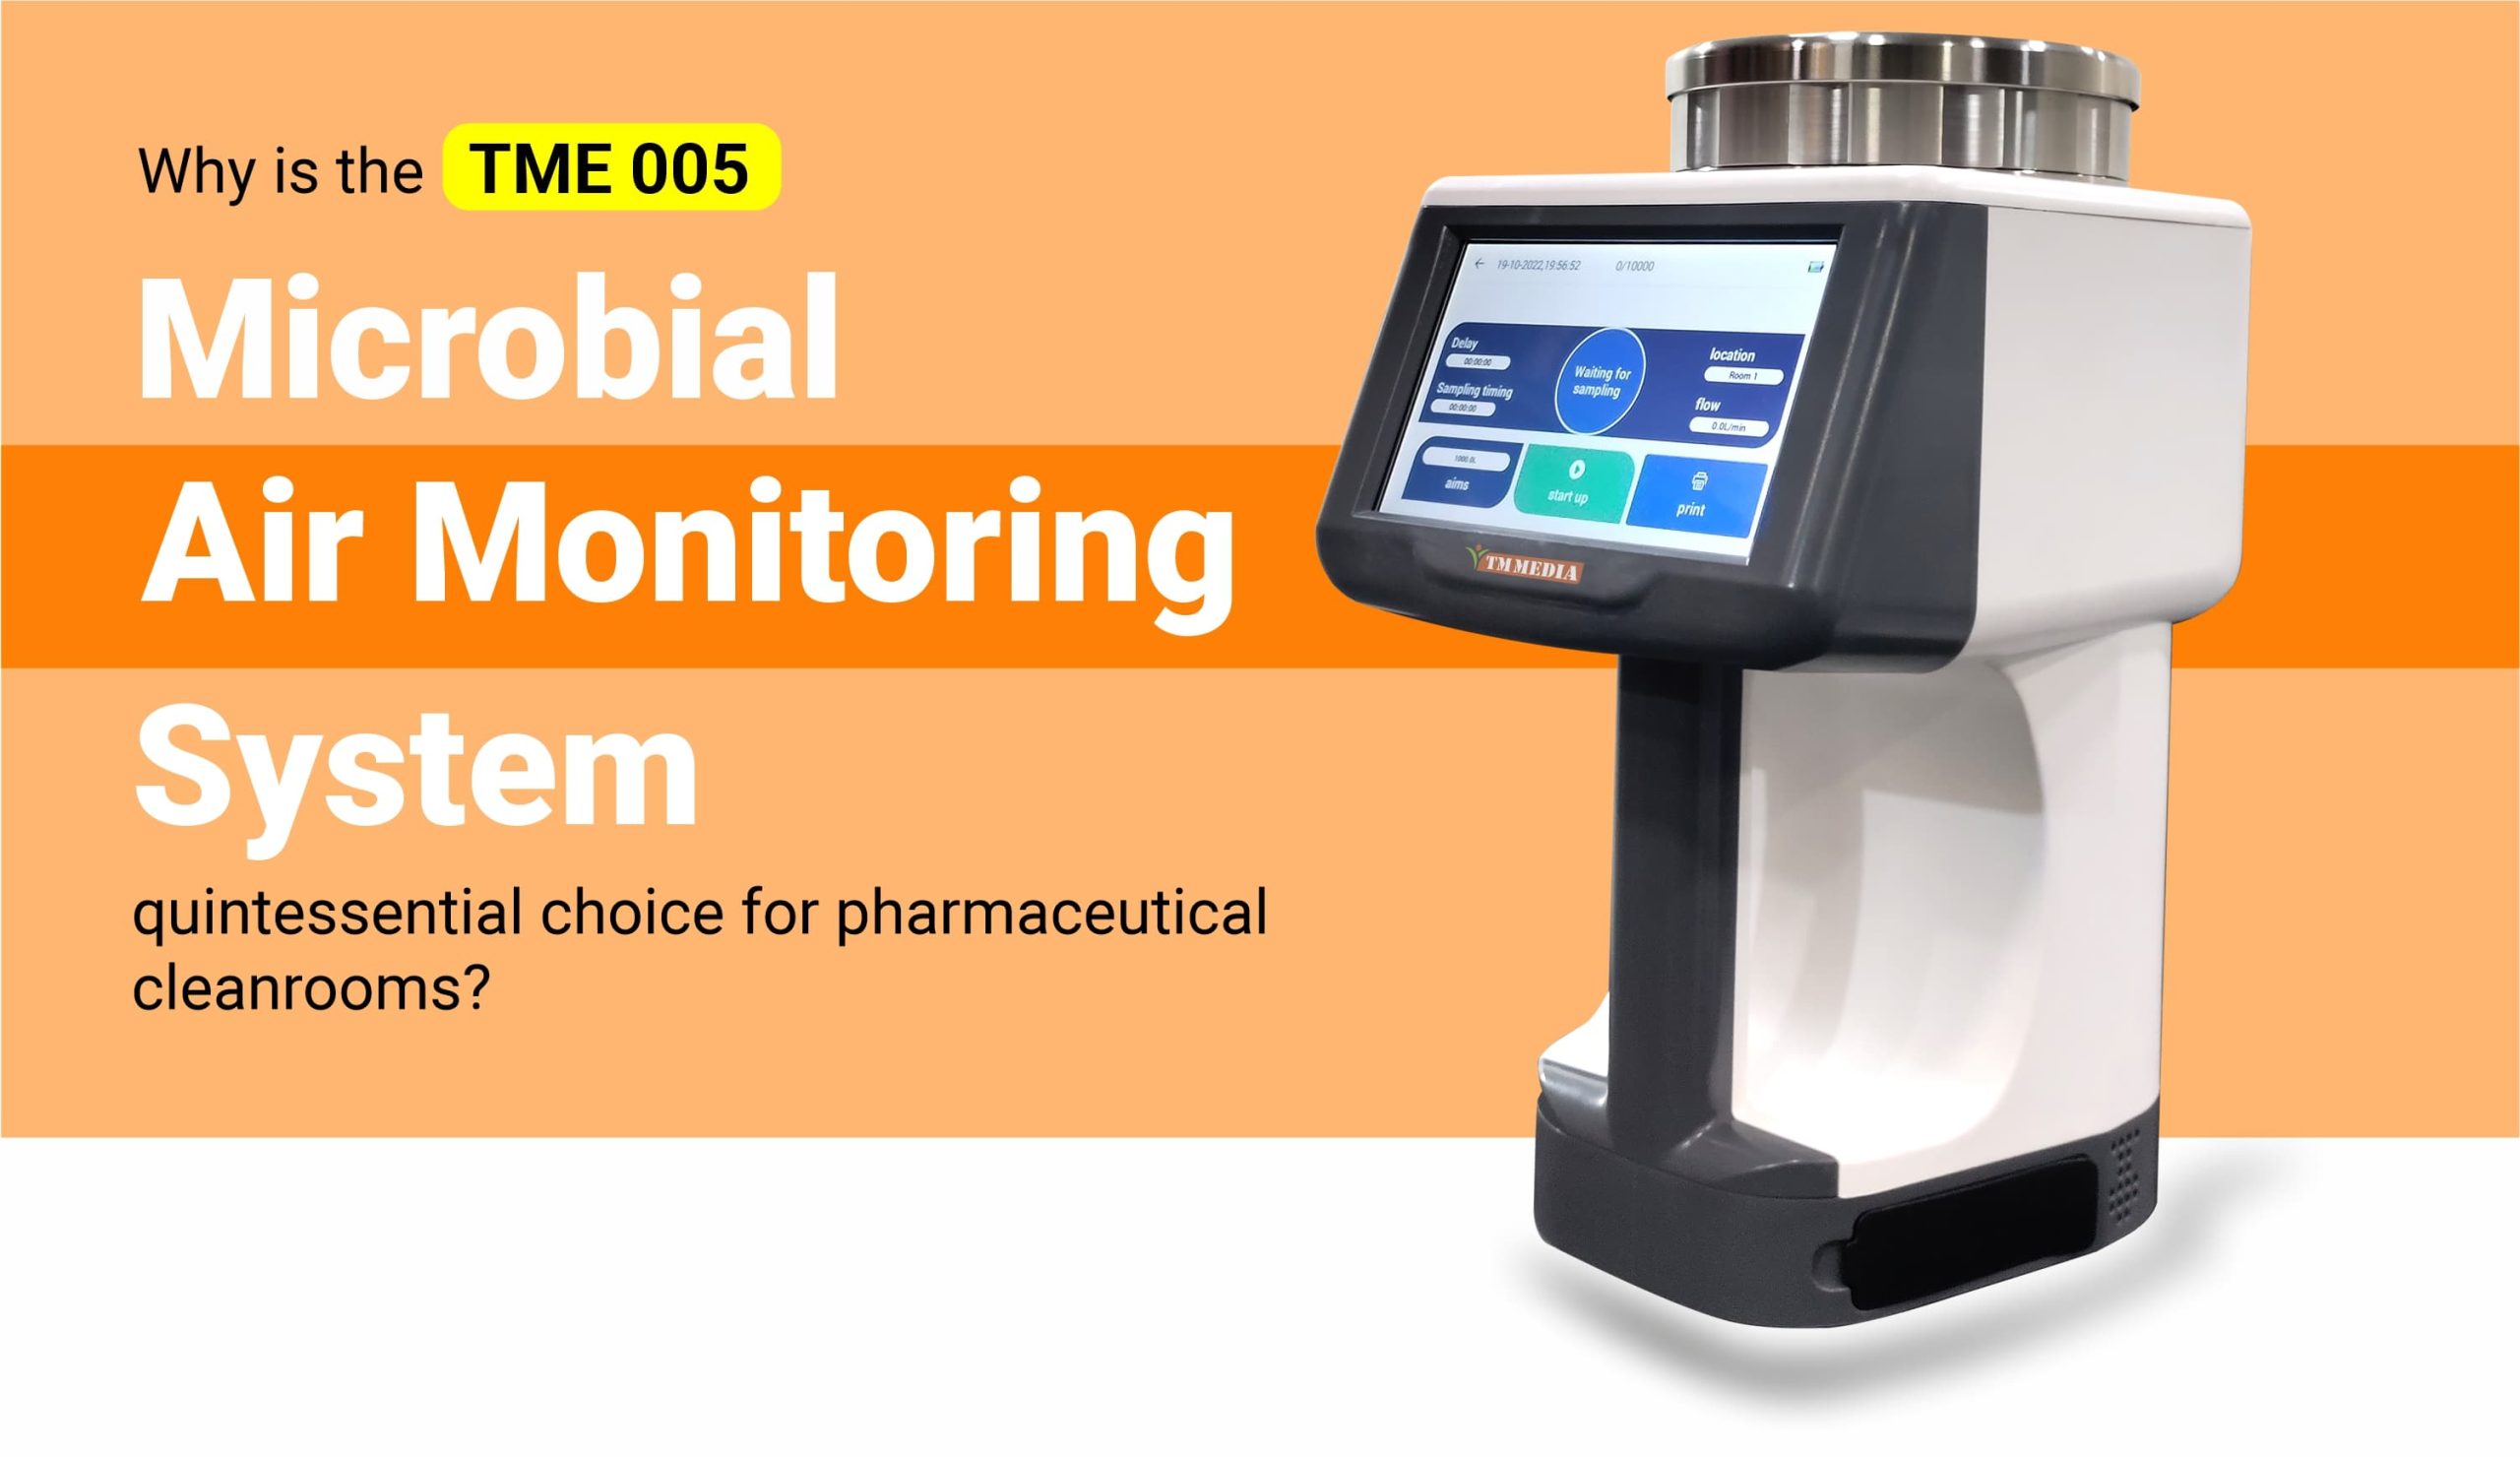 Microbial Air Monitoring System (TME 005): Ensuring Cleanroom Integrity in the Pharmaceutical Industry